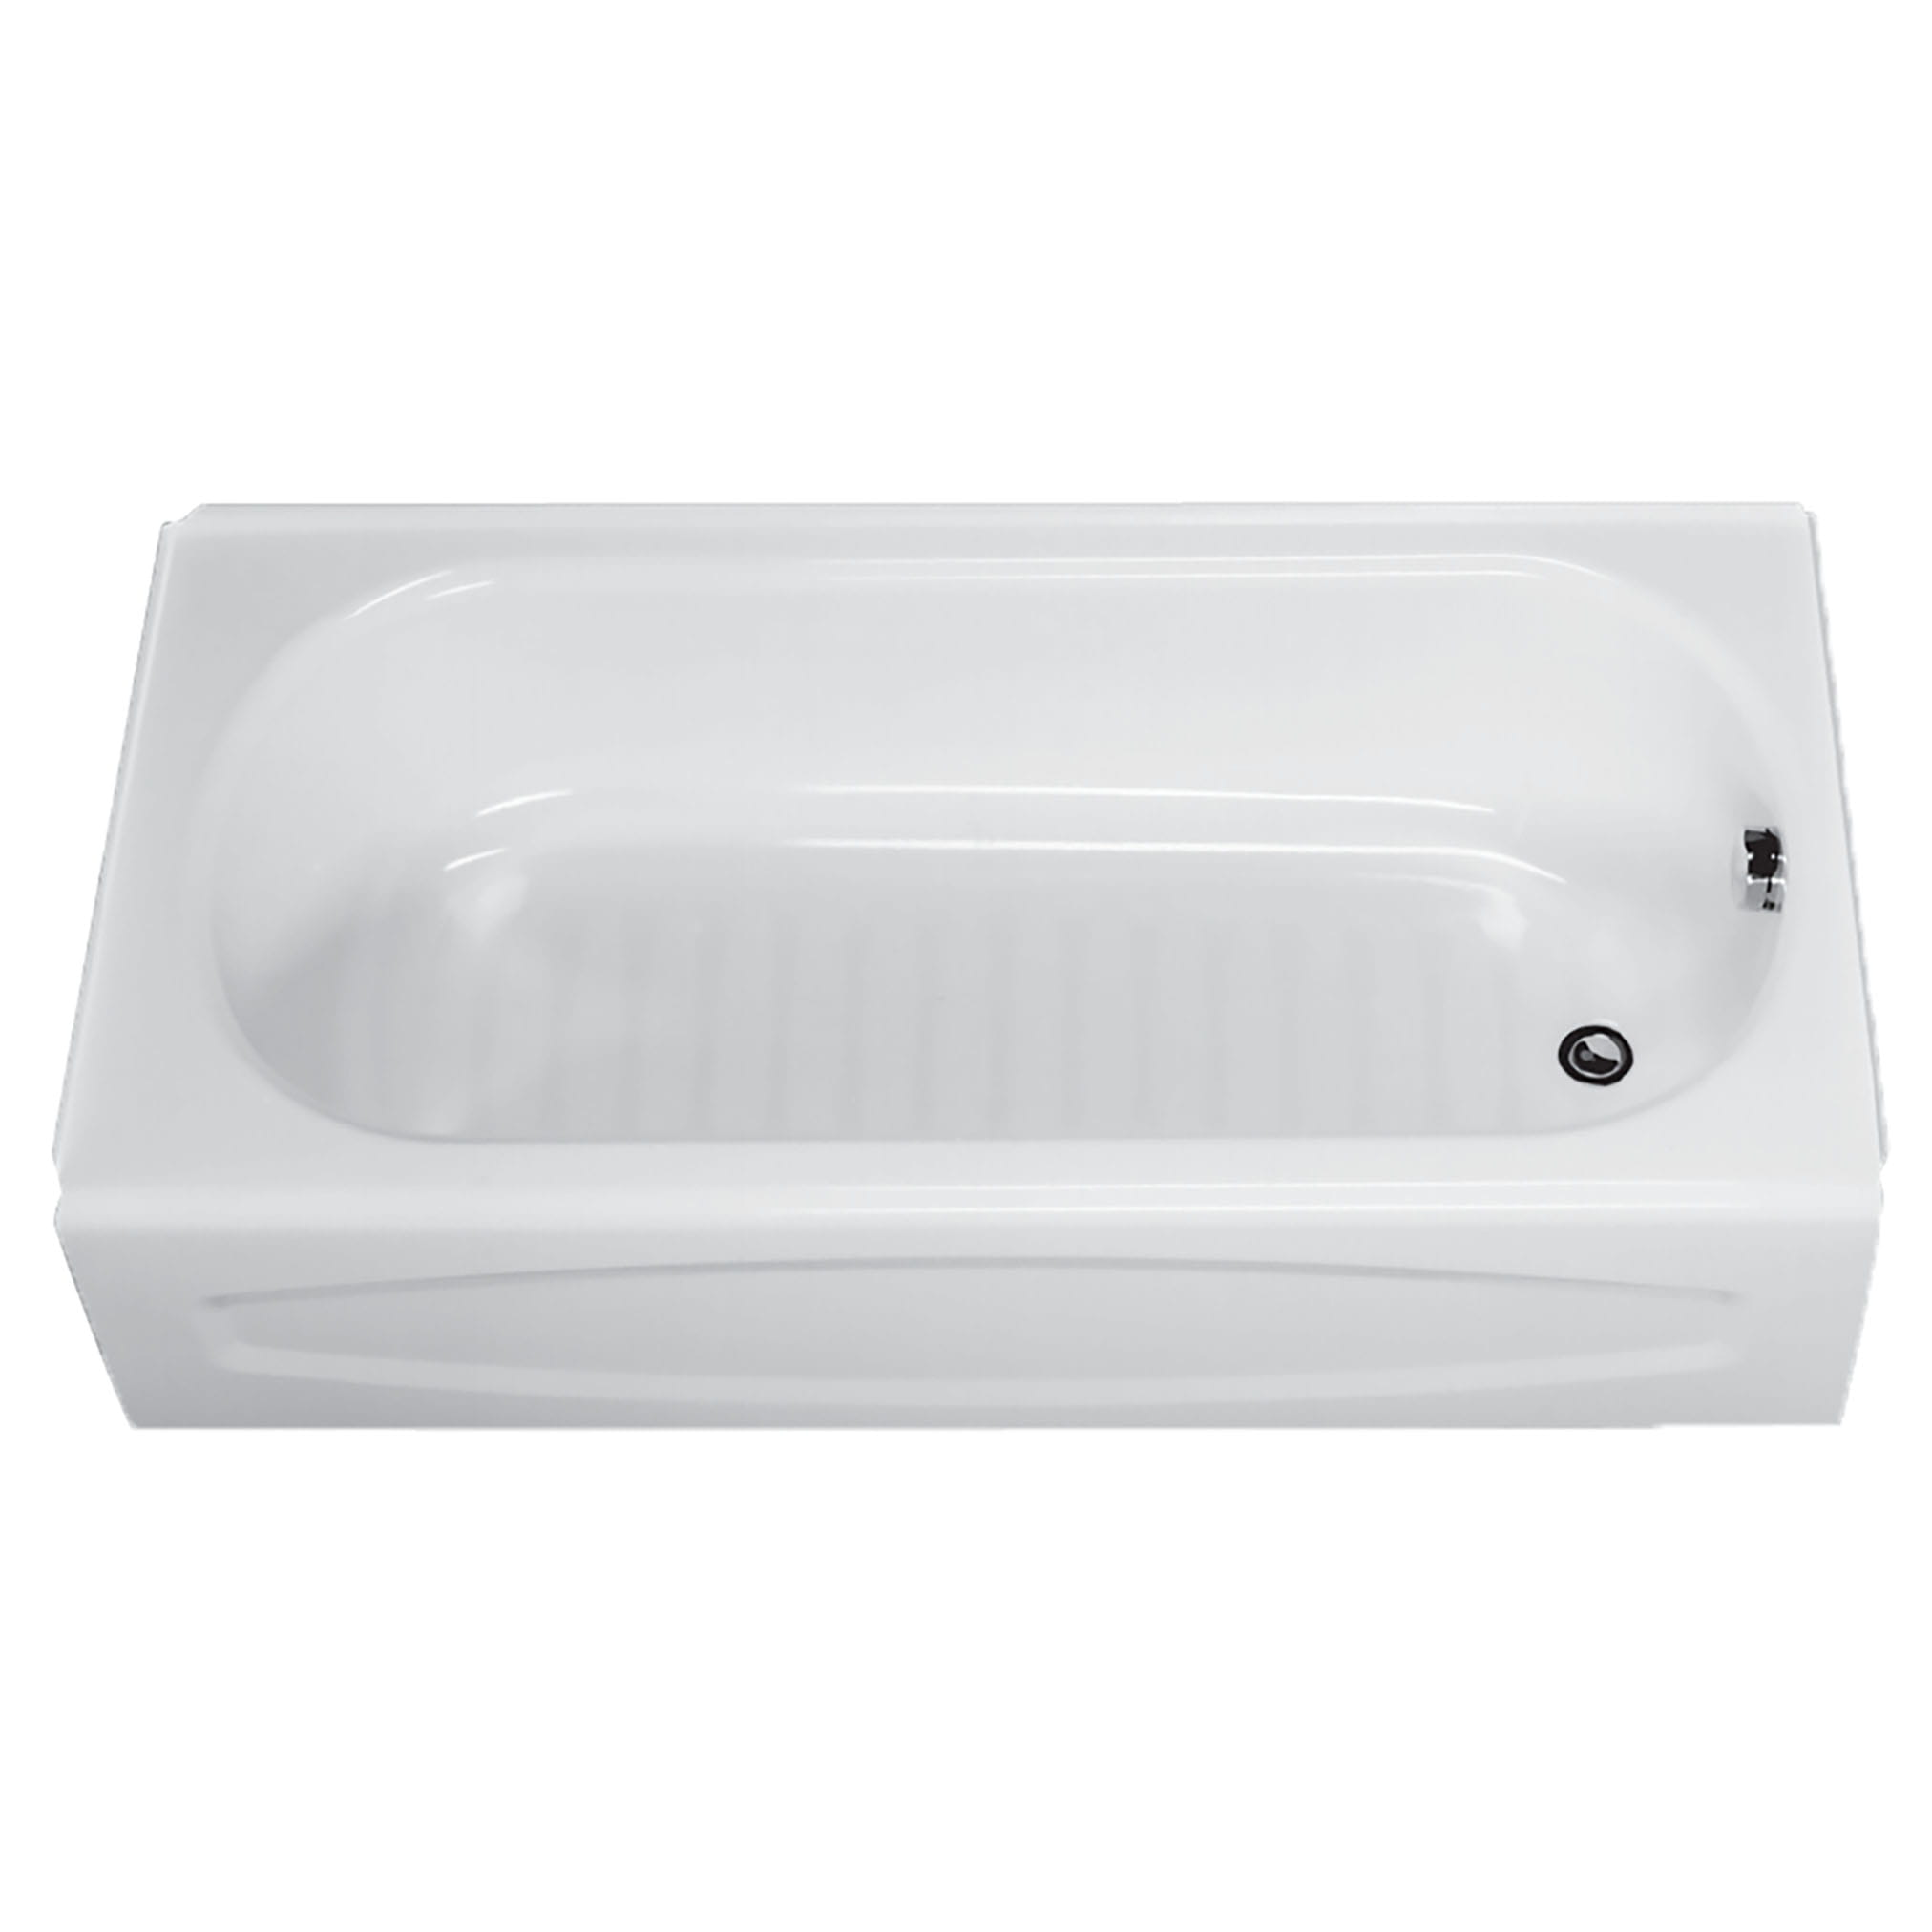 New Salem 60 x 30 Inch Integral Apron Bathtub With Right Hand Outlet WHITE